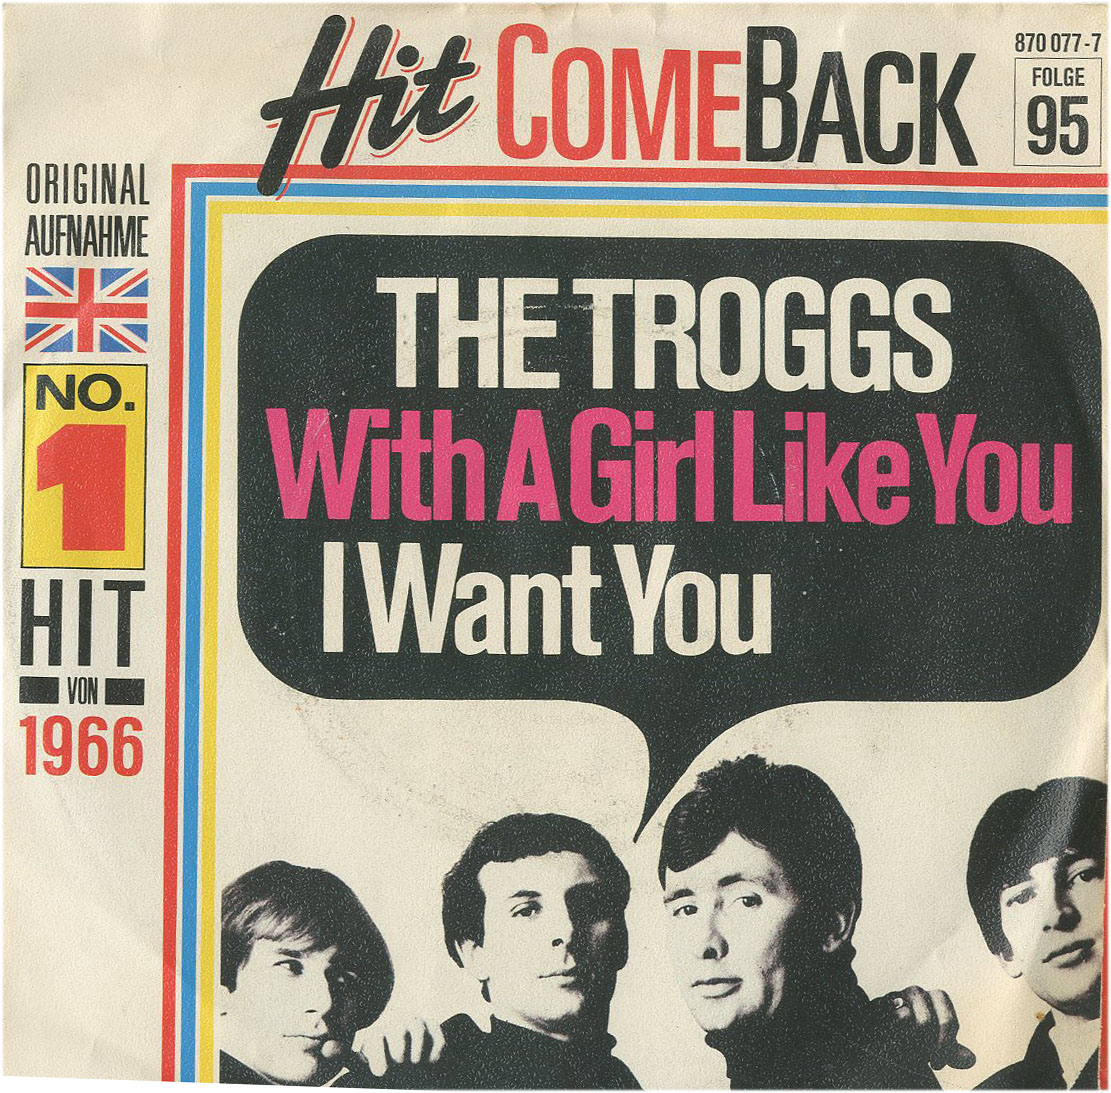 Albumcover The Troggs - With A Girl  Like You / I Want You (Hit ComeBack 95)